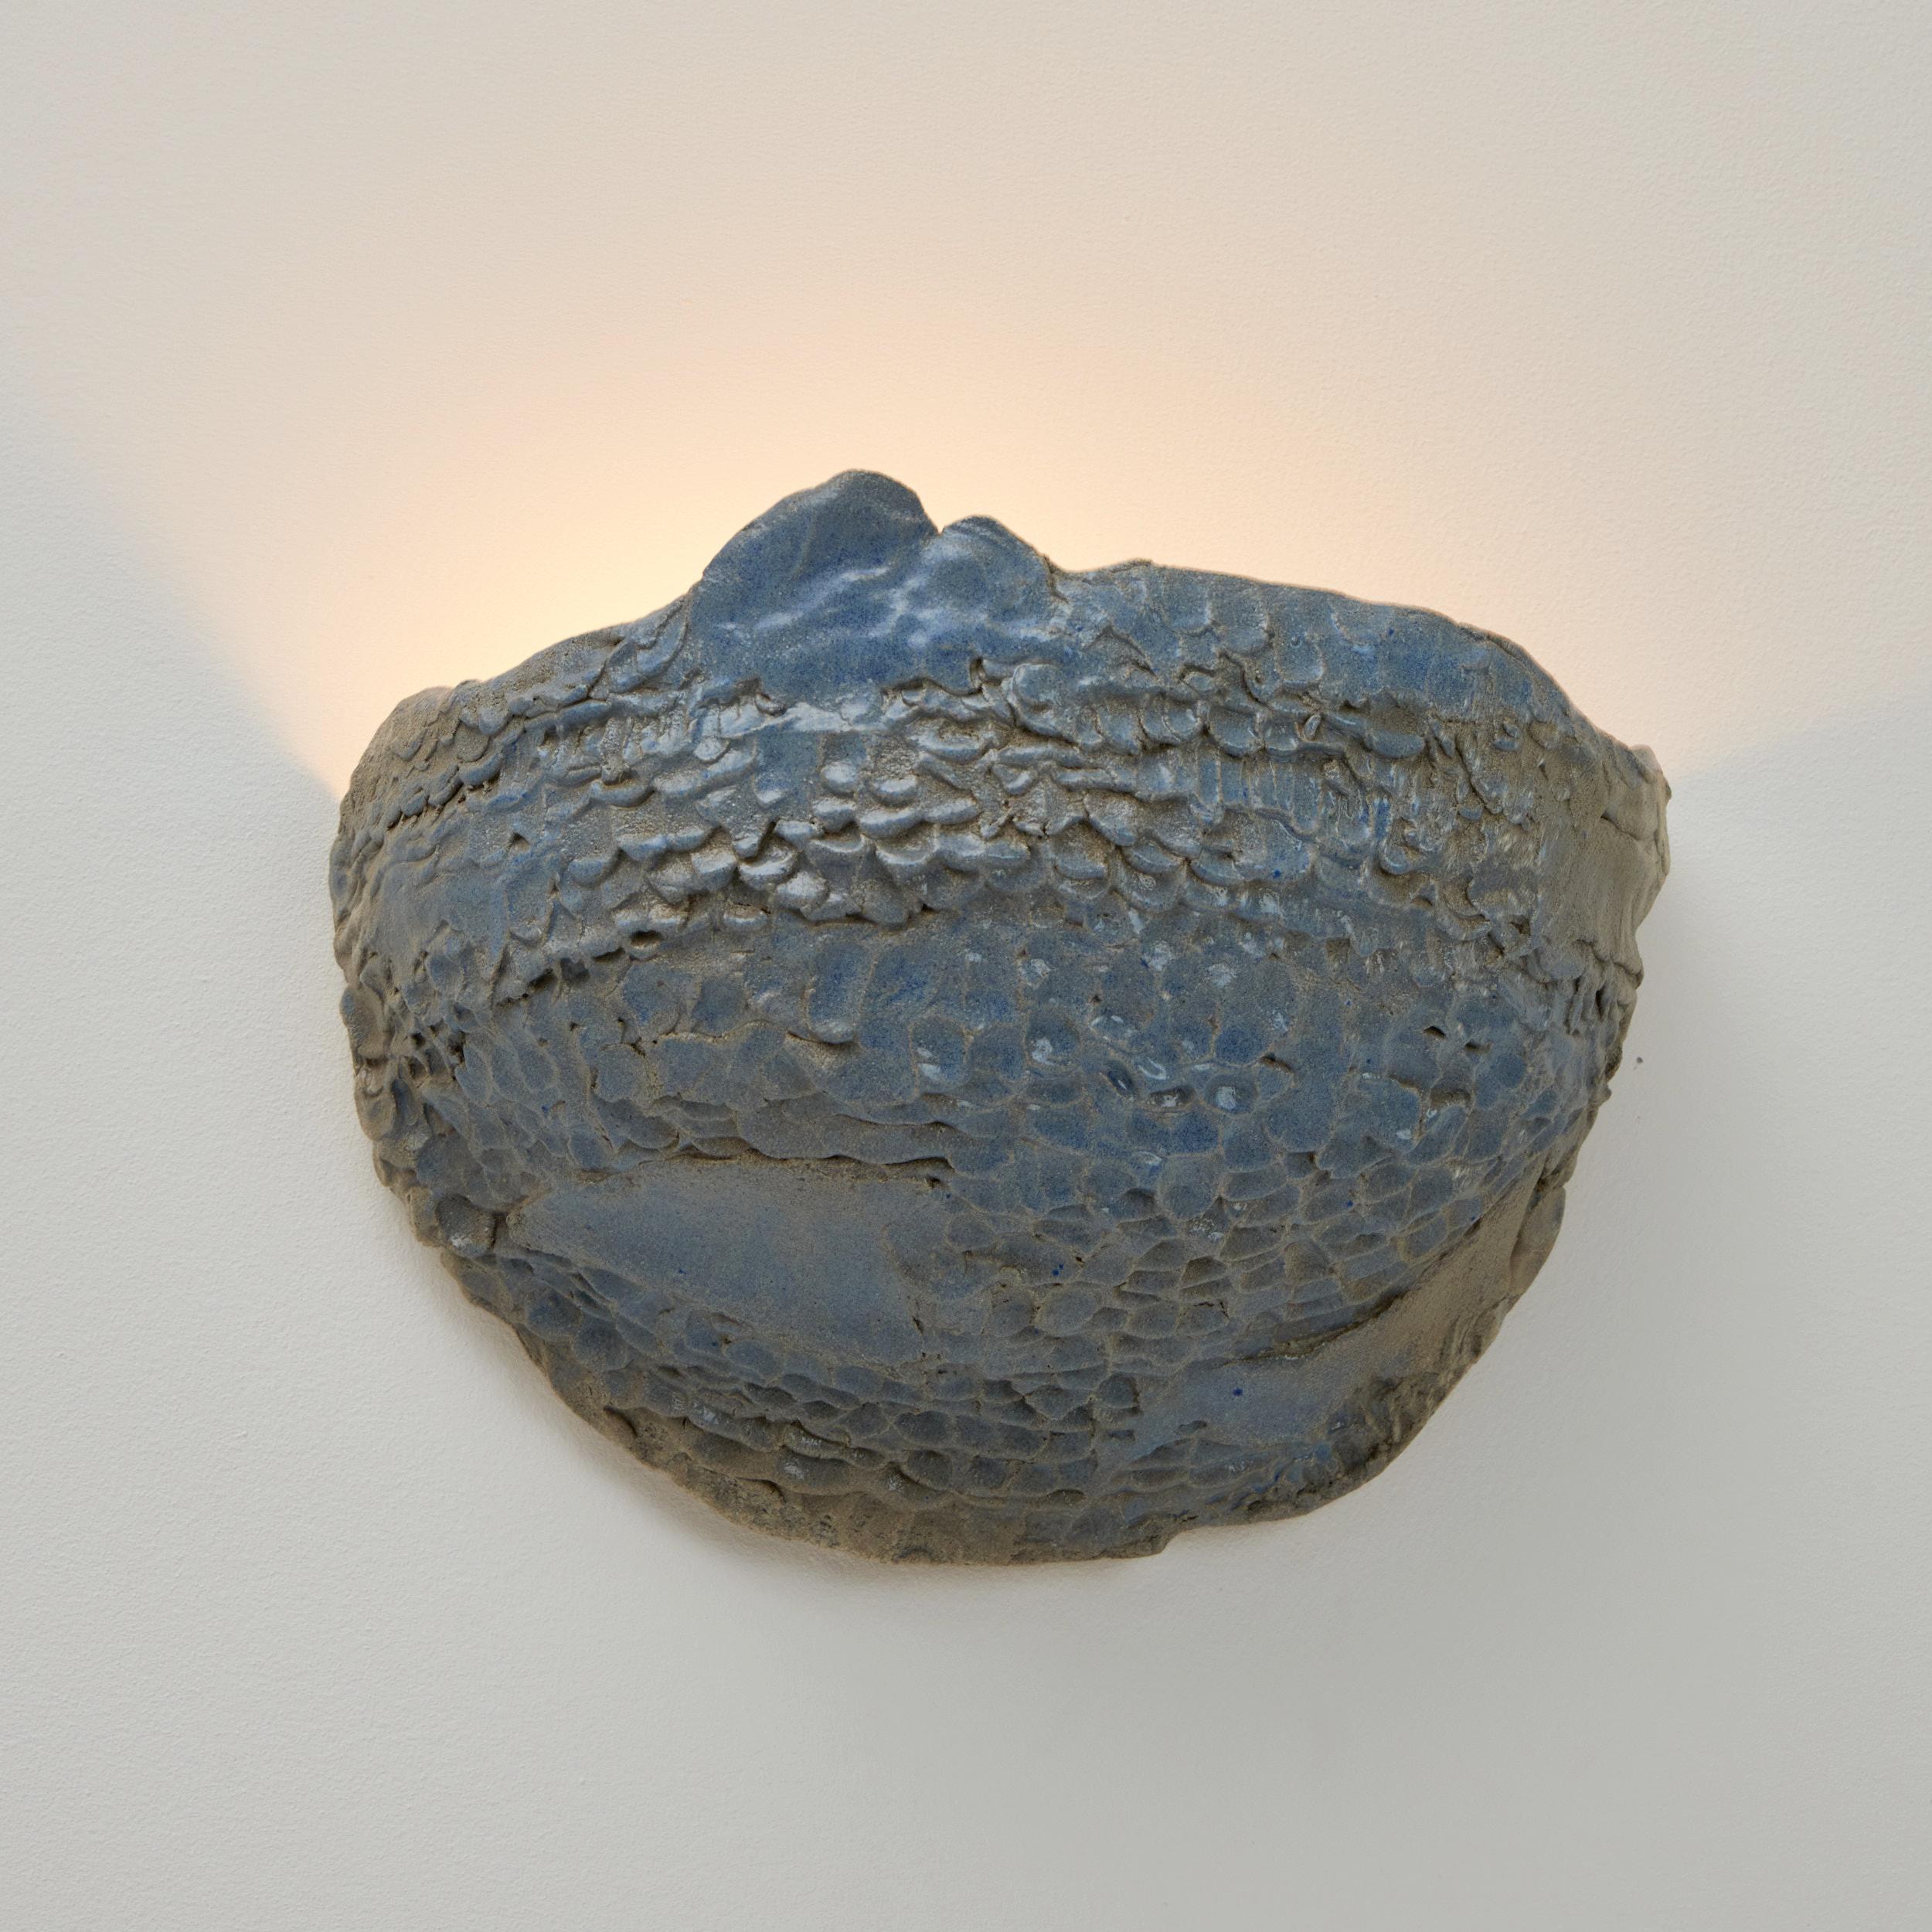 Casa Wall Light No 5 in moss blue
Designed by Project 213A in 2023

Artisanal ceramic light with textured finish, made in Project 213A's own ceramic workshop.
Each piece is unique due to its handmade nature, shapes and shades vary slightly.

Bespoke